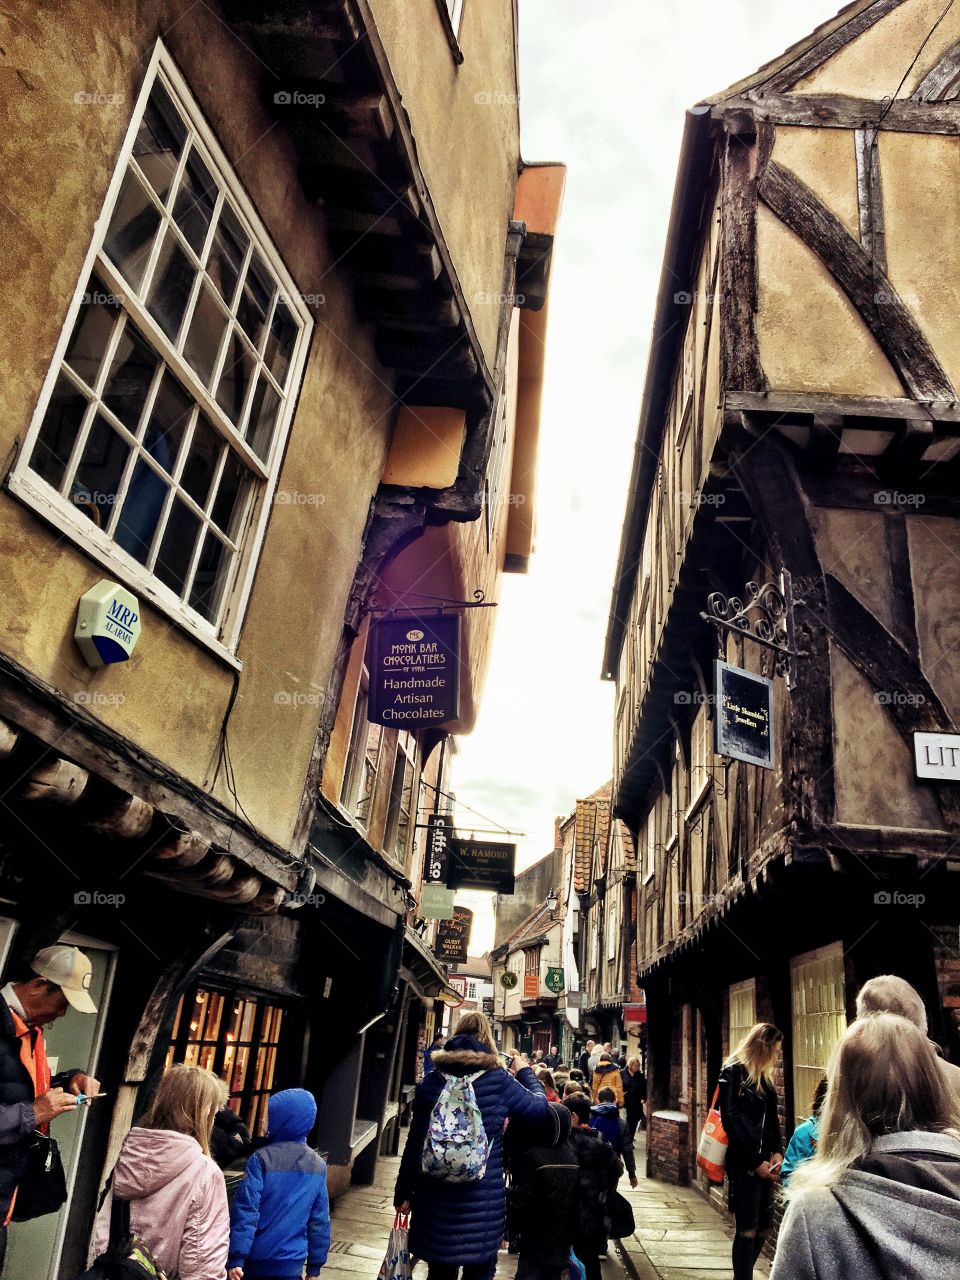 The Shambles in York. England’s oldest street, also featured in the Harry Potter films